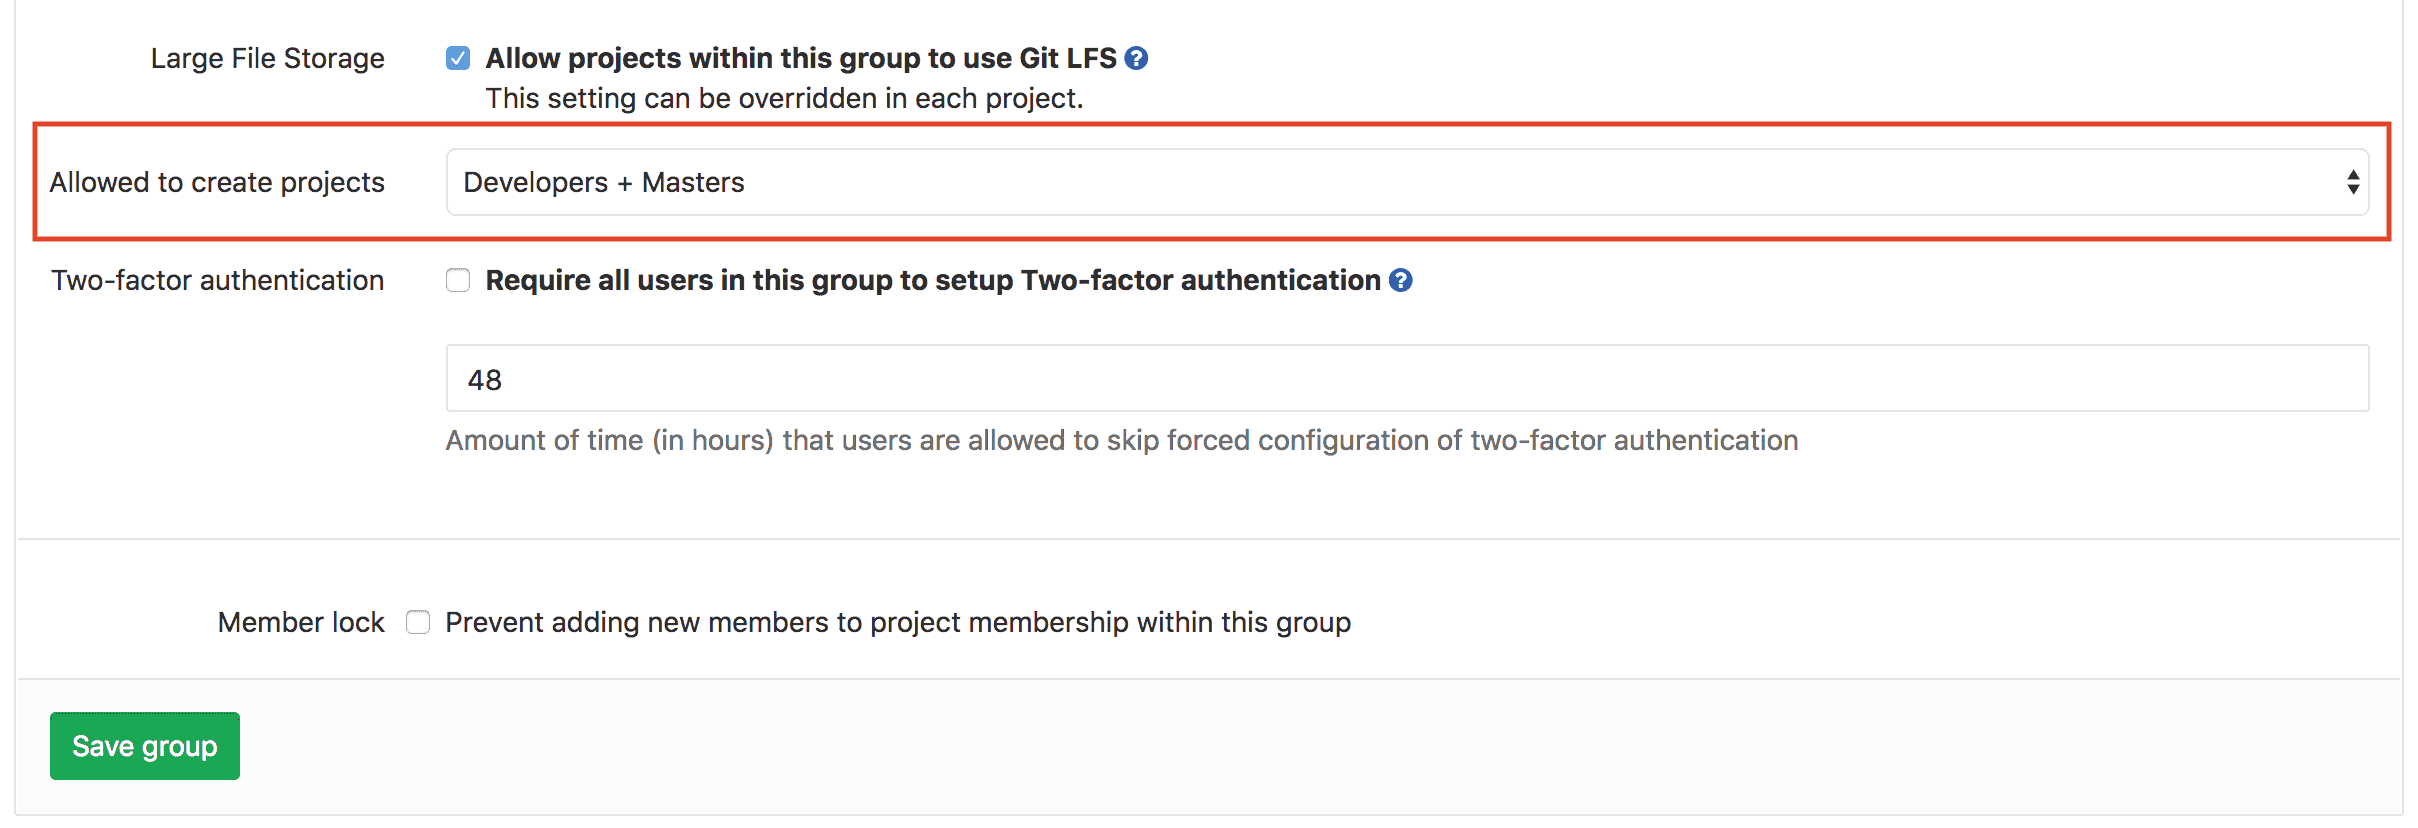 Allow developers to create projects in groups